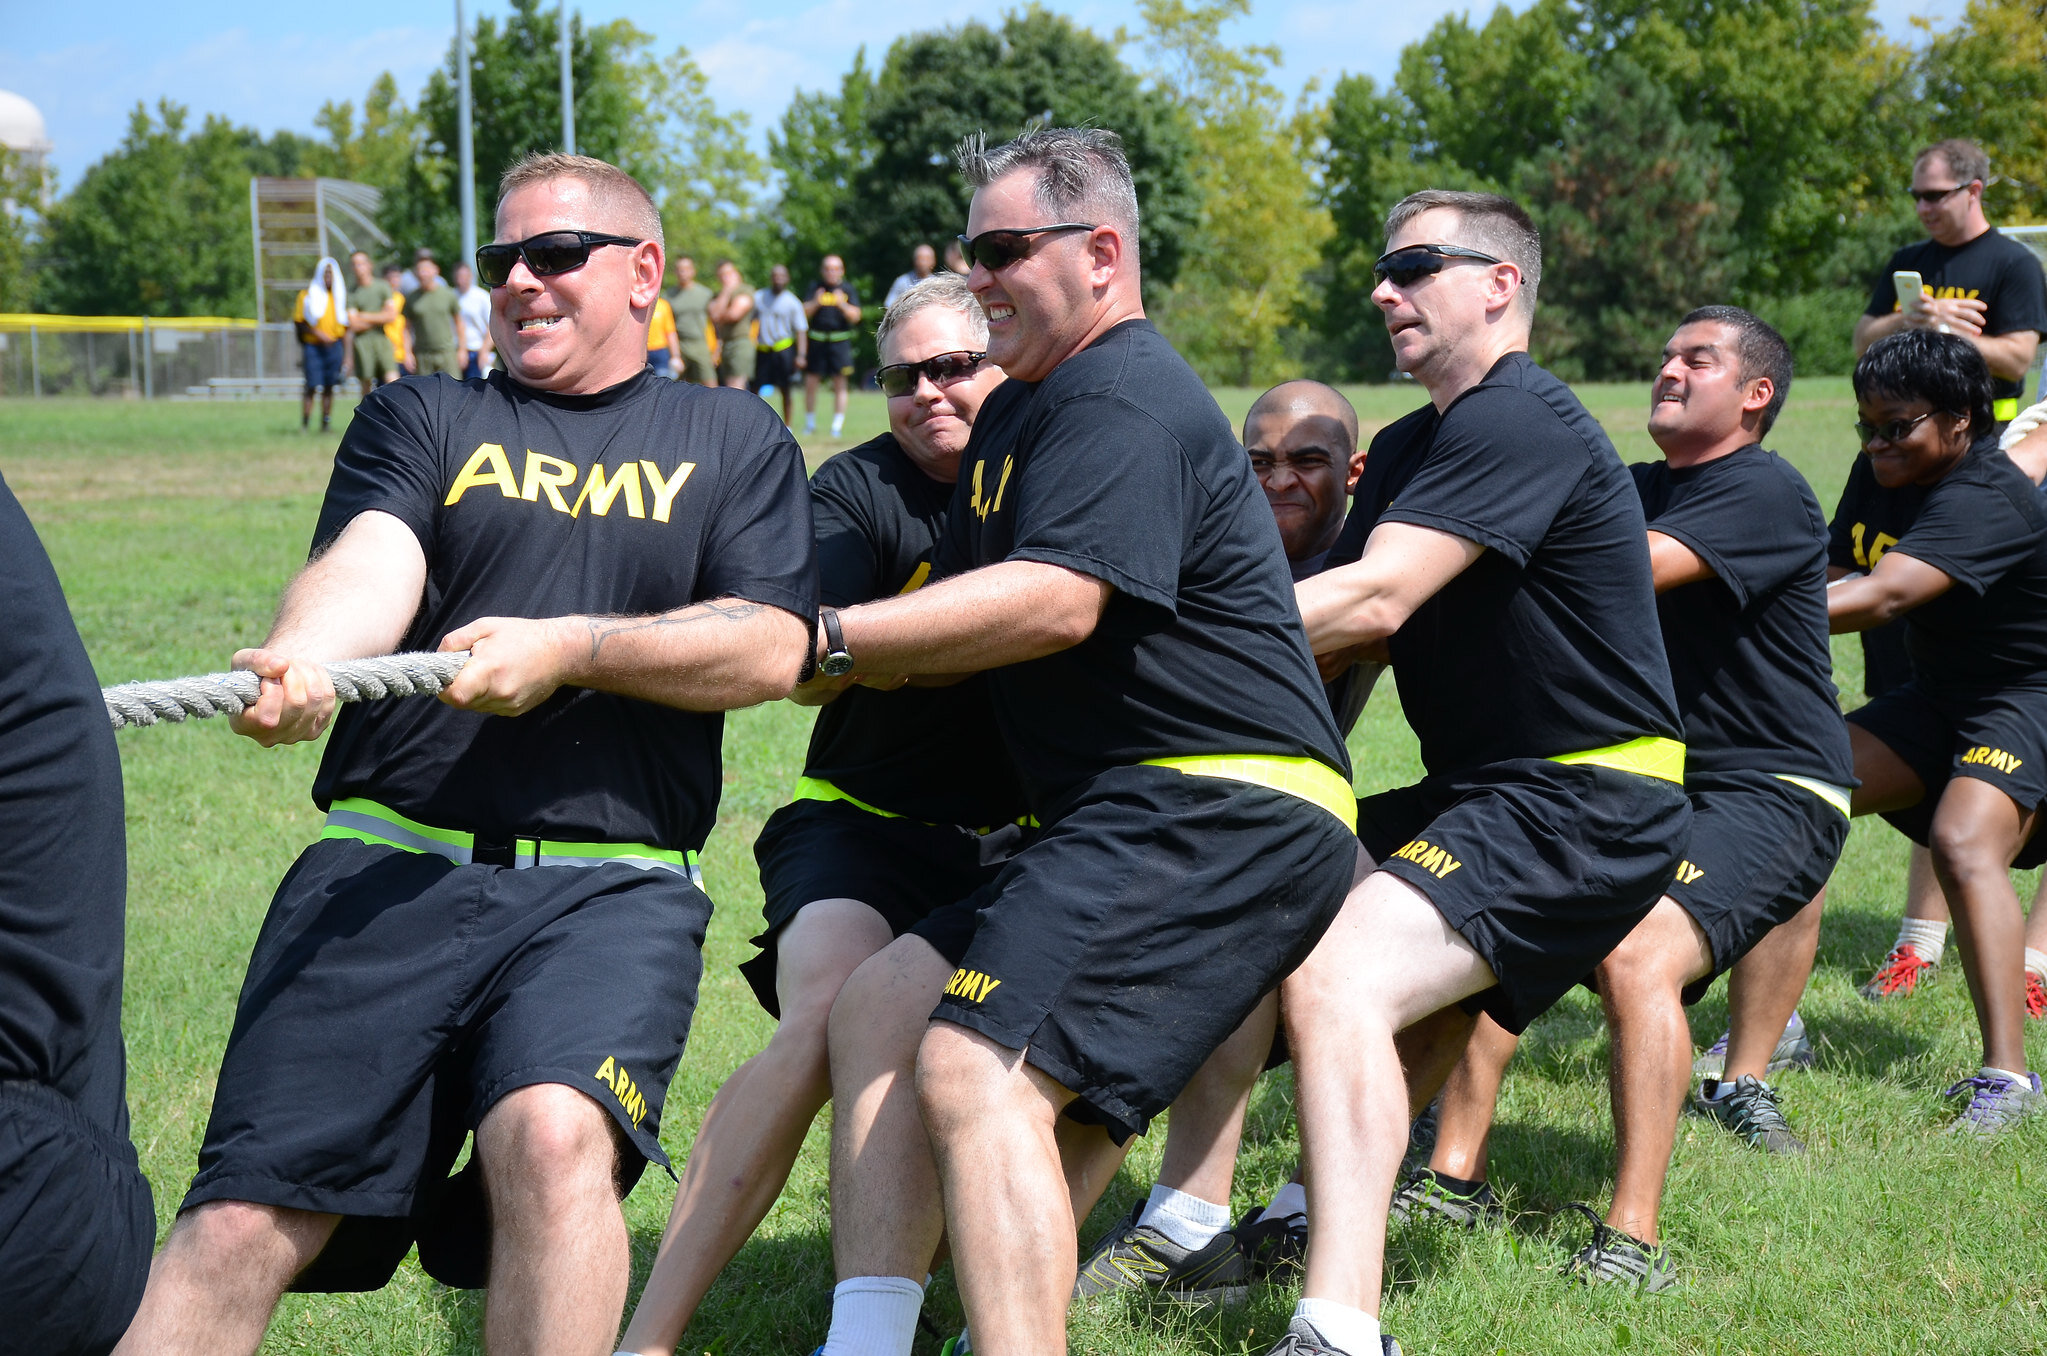 Tug-o-War - Sports Day at Fort Belvoir